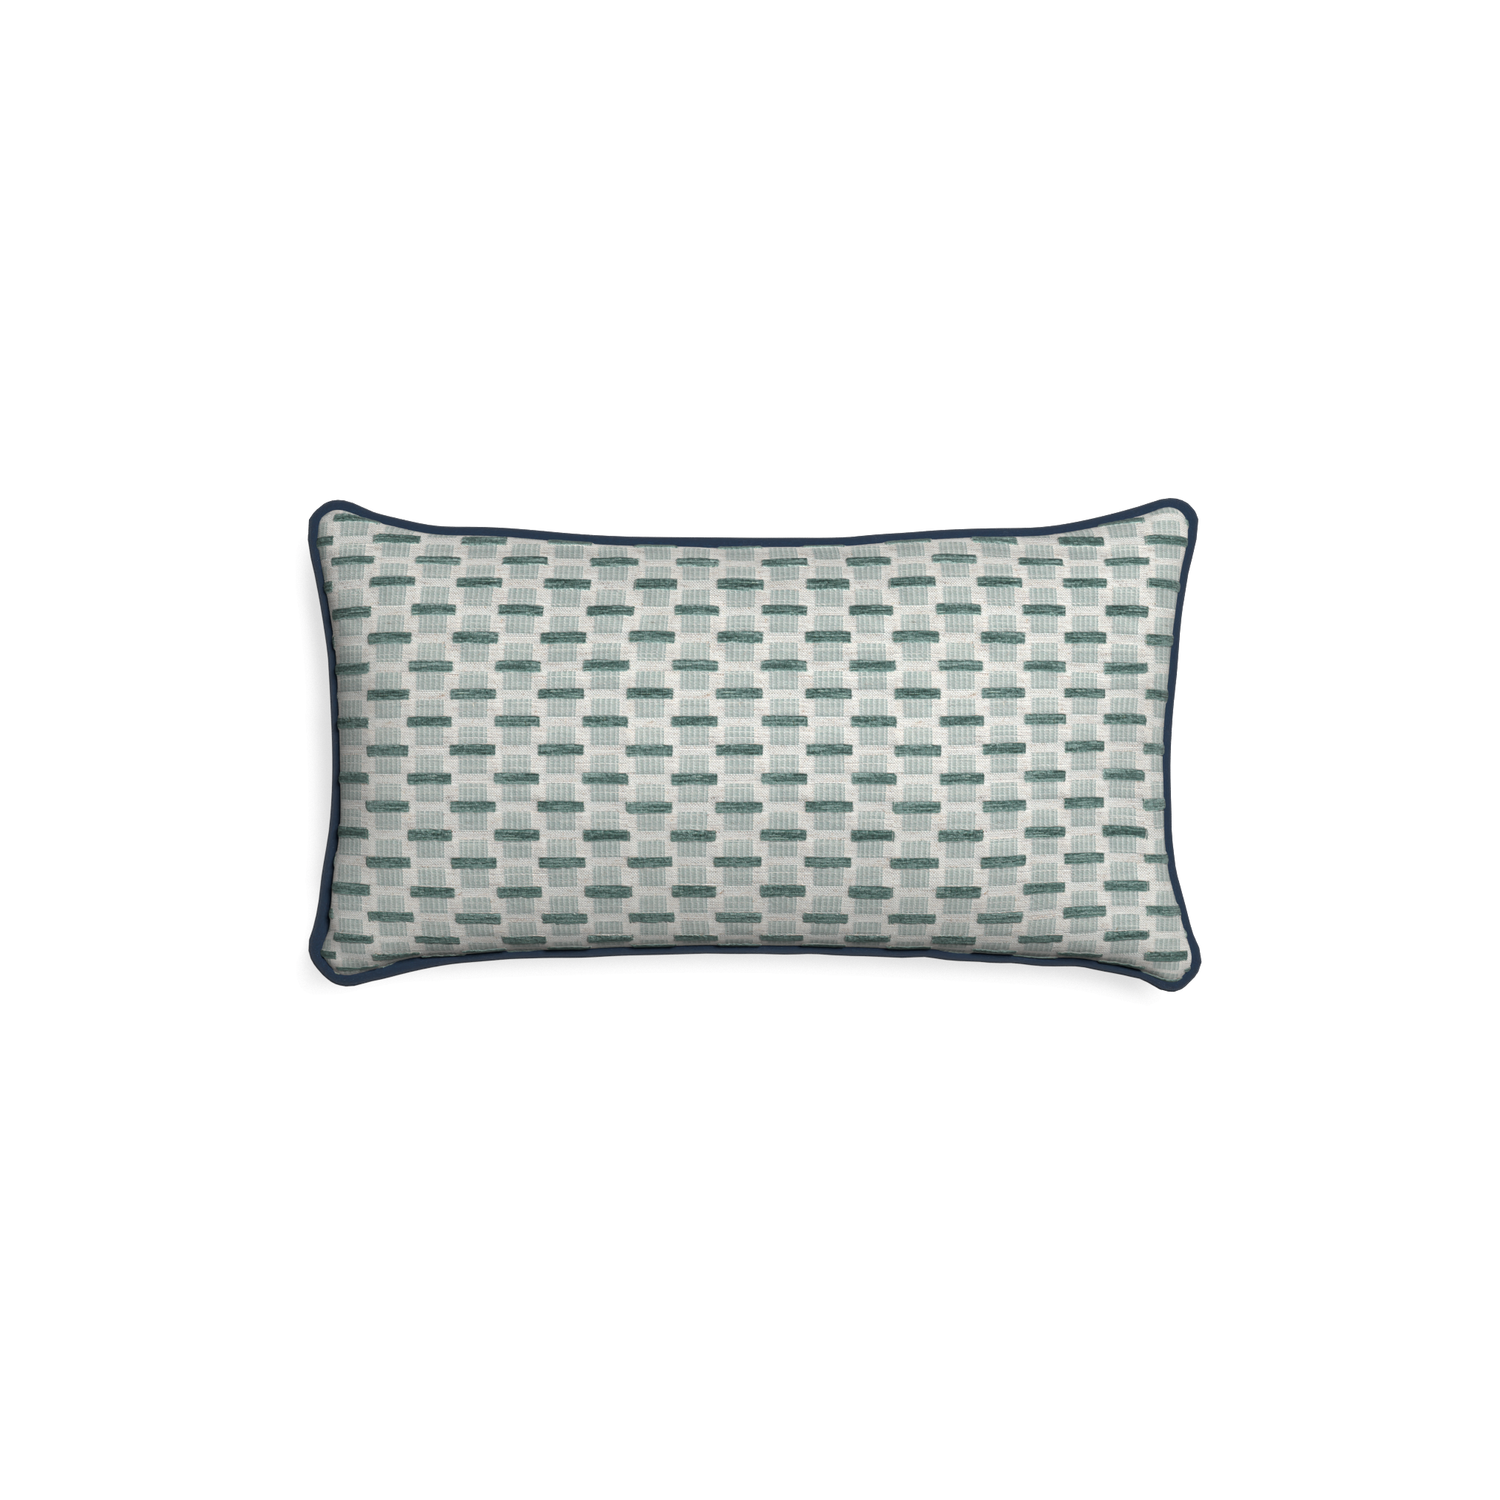 Petite-lumbar willow mint custom green geometric chenillepillow with c piping on white background